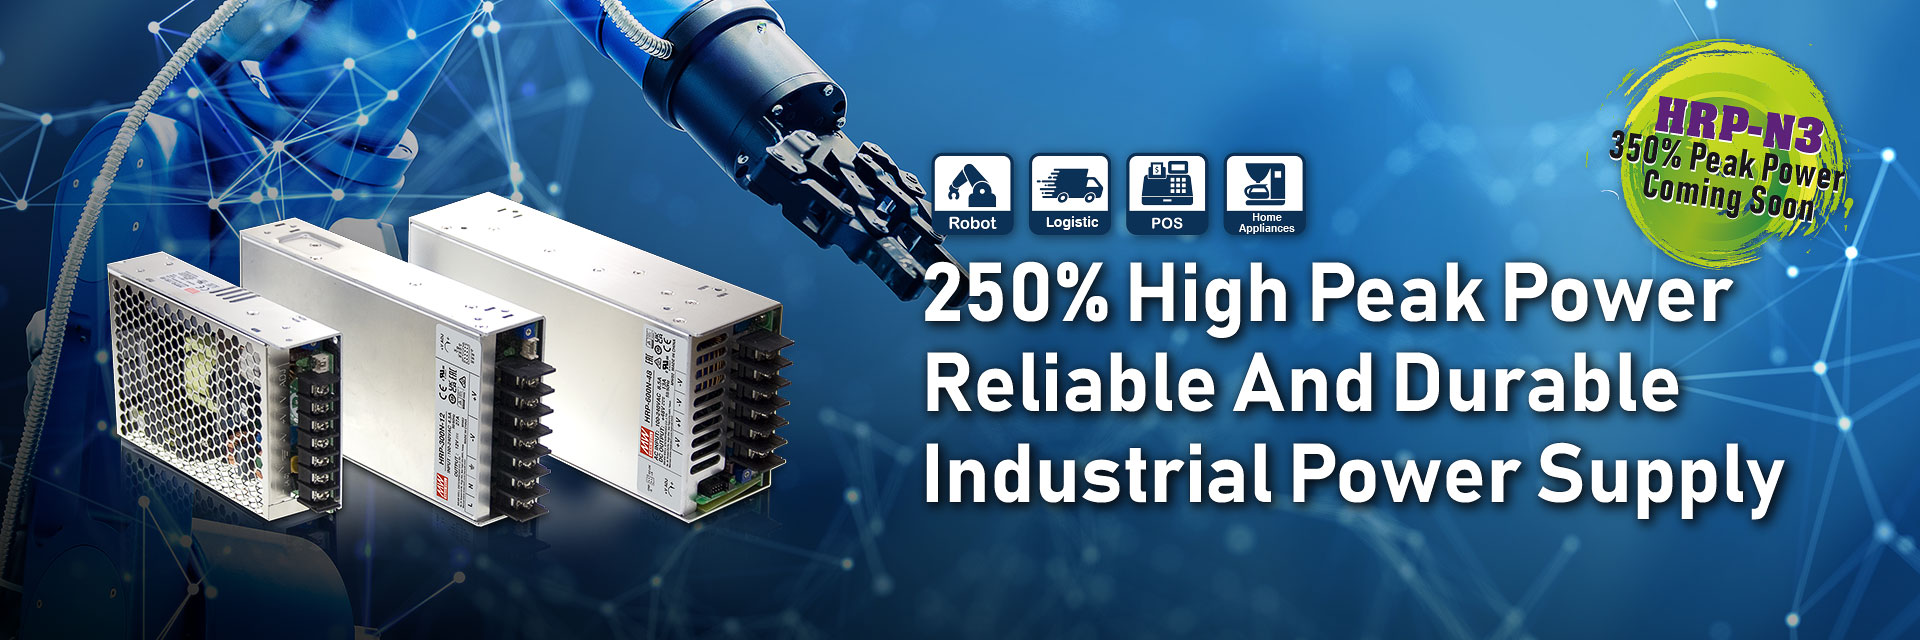 MEAN WELL 350% High Peak PowerReliable And Durable Industrial Power Supply